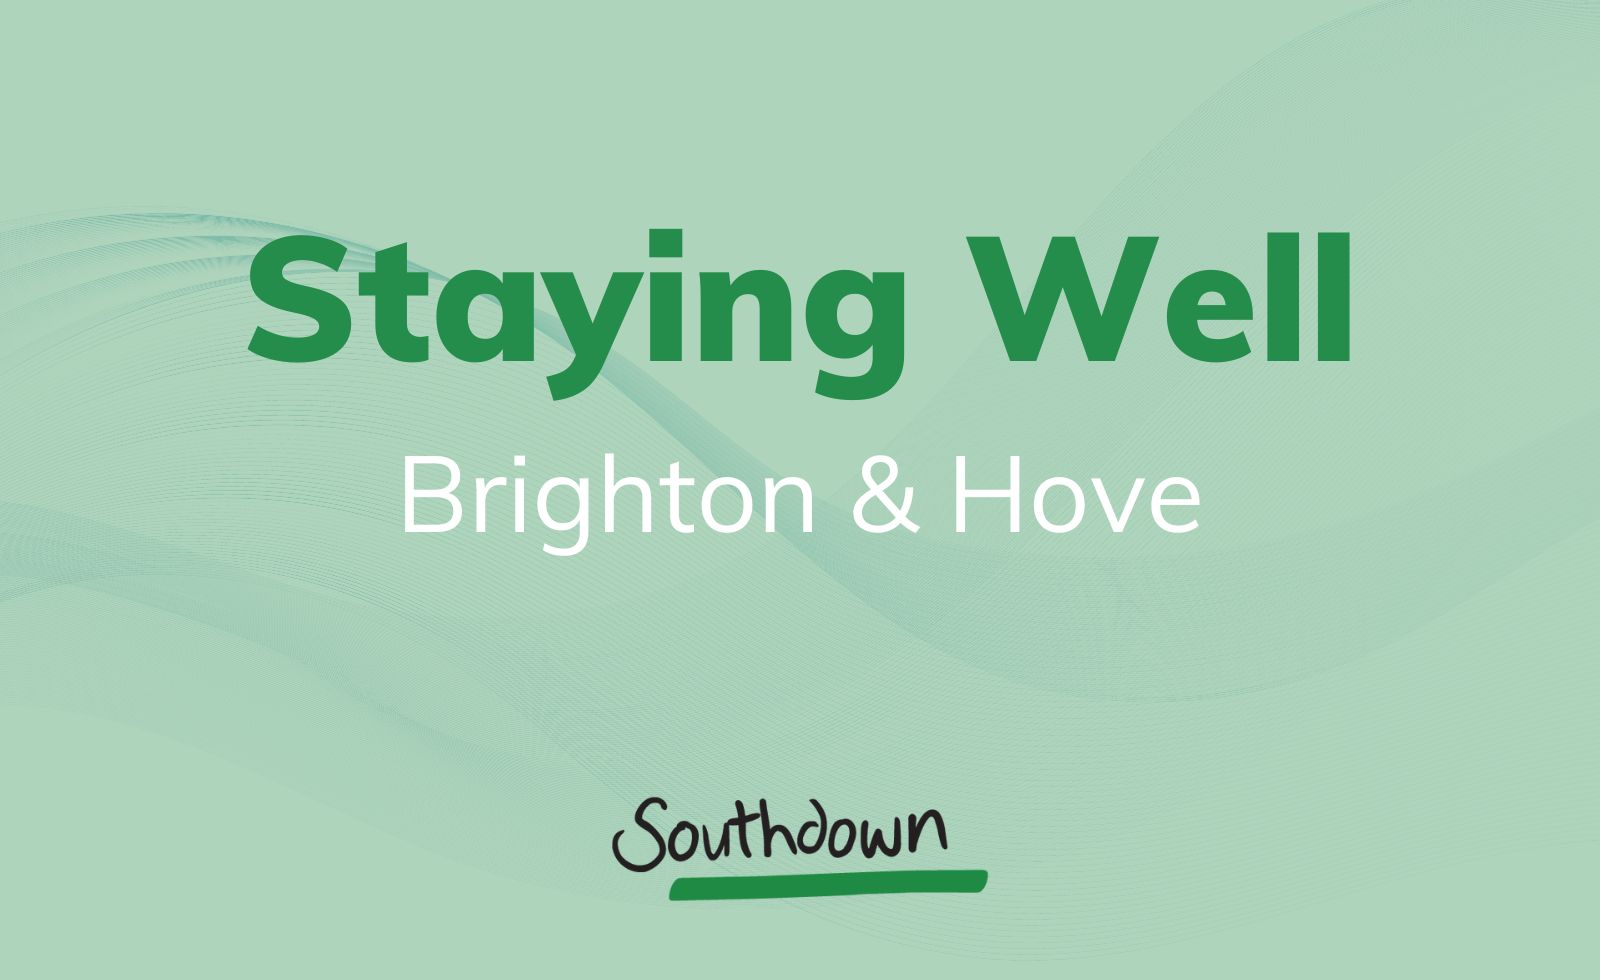 Pale green pattered background with text that reads Staying Well Brighton & Hove. Also has the Southdown logo.